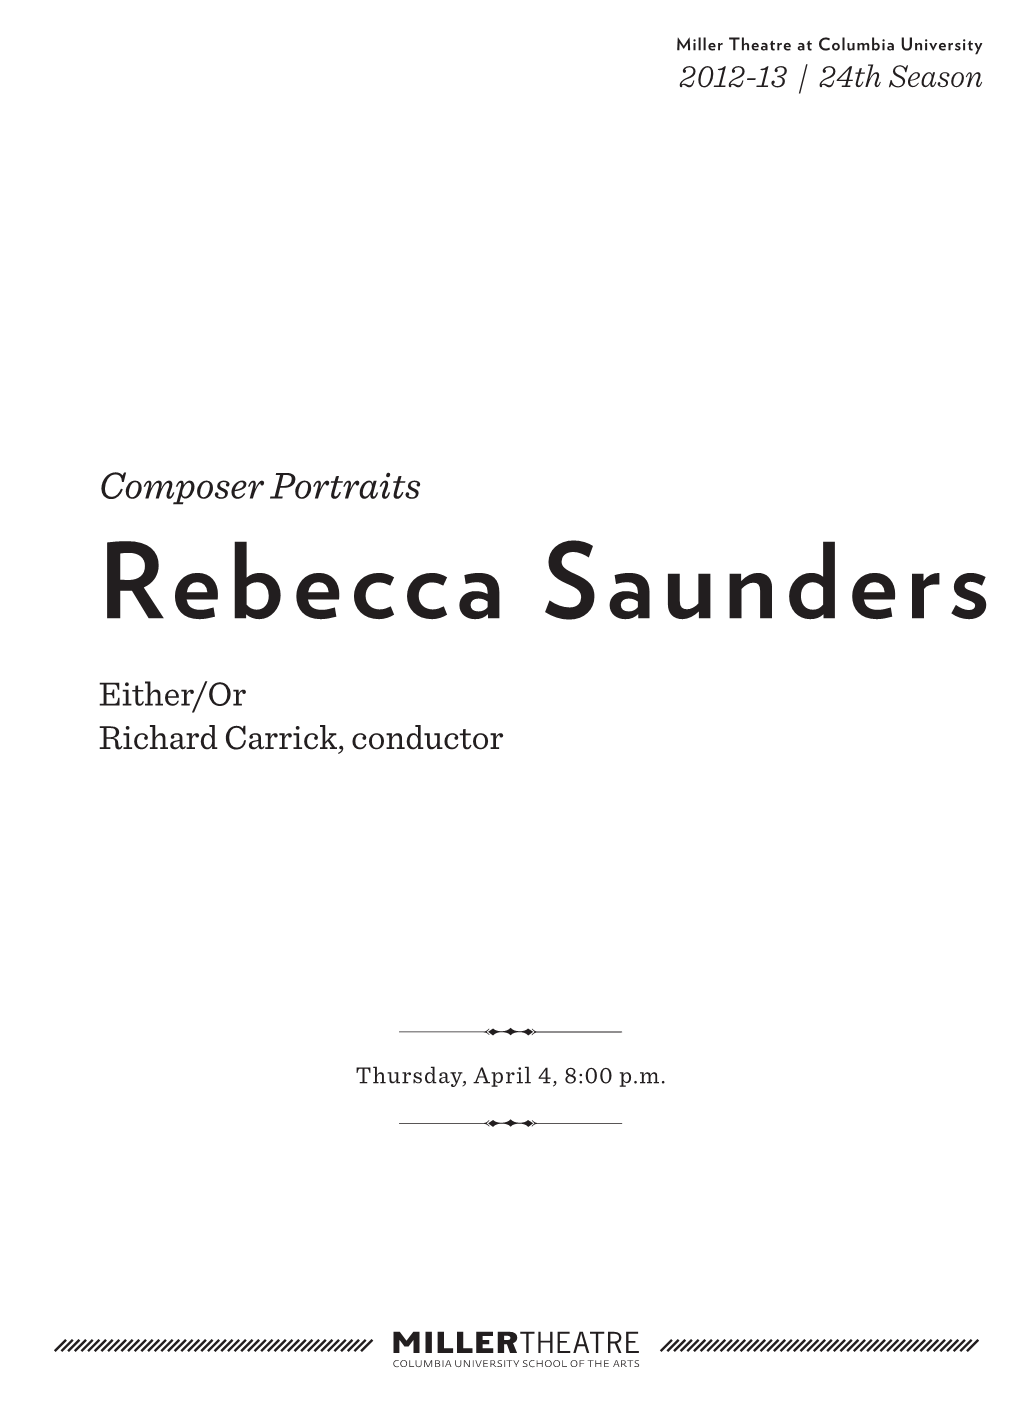 Rebecca Saunders Either/Or Richard Carrick, Conductor